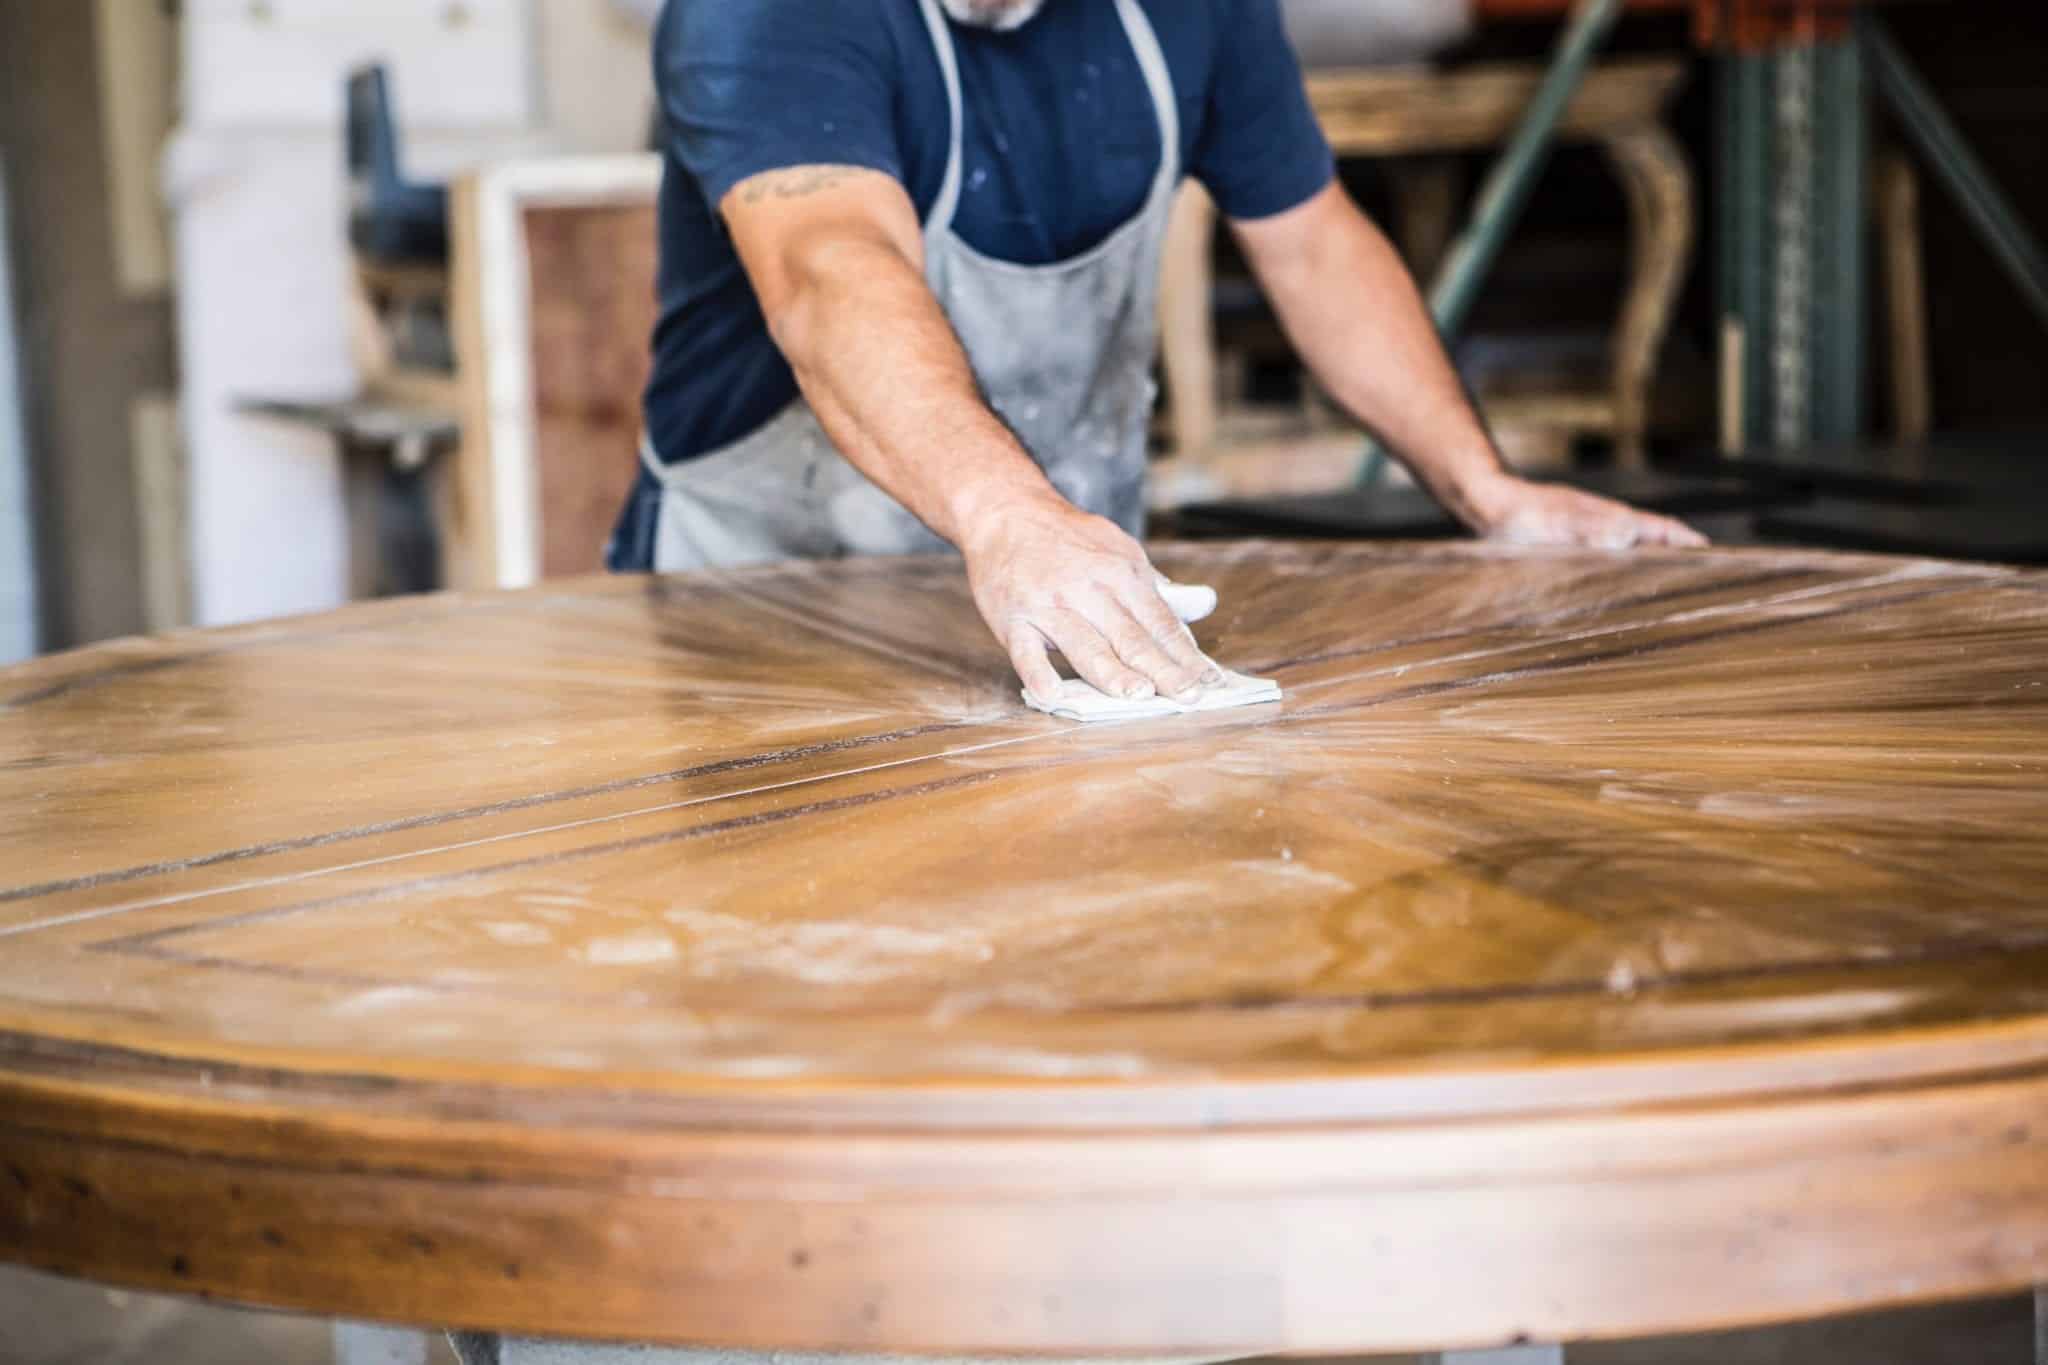 5 Steps to Go from DIY Hobbyist to a Professional Woodworker